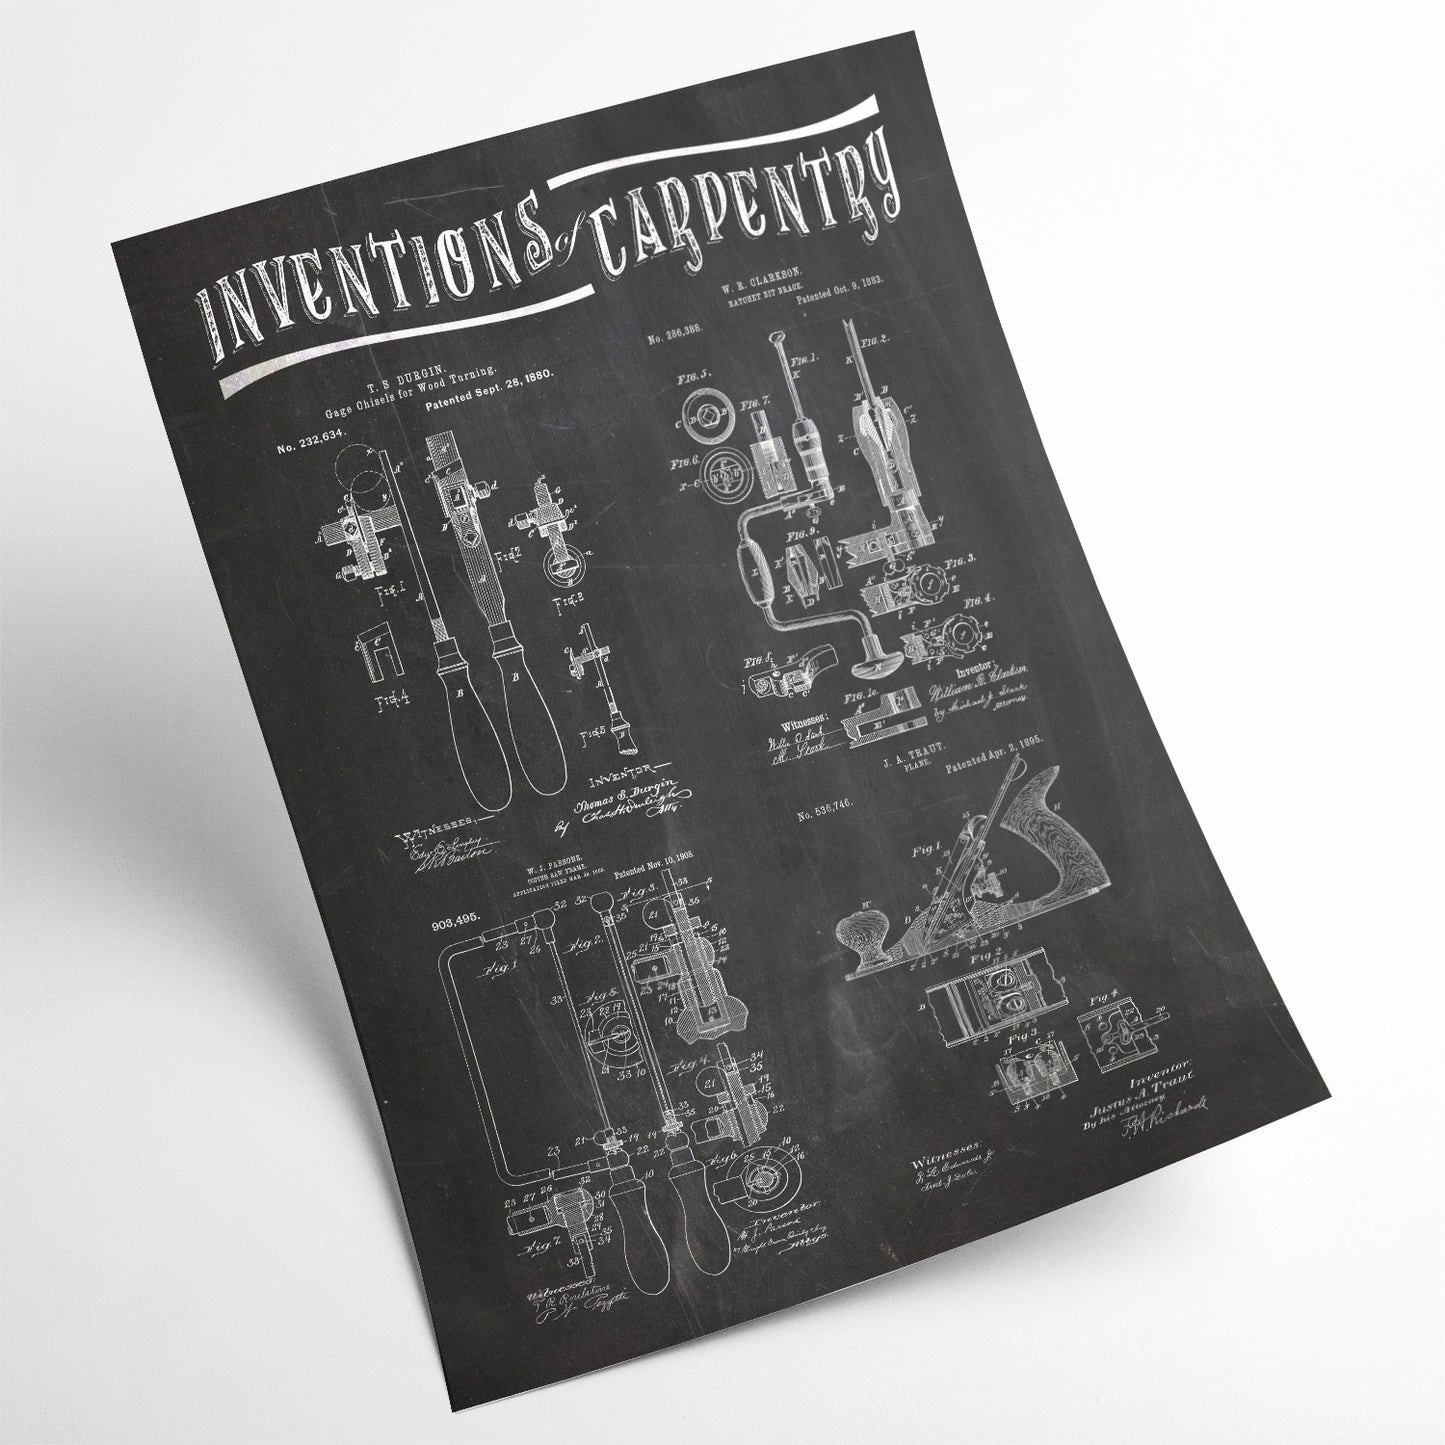 Affiche Inventions Menuiserie